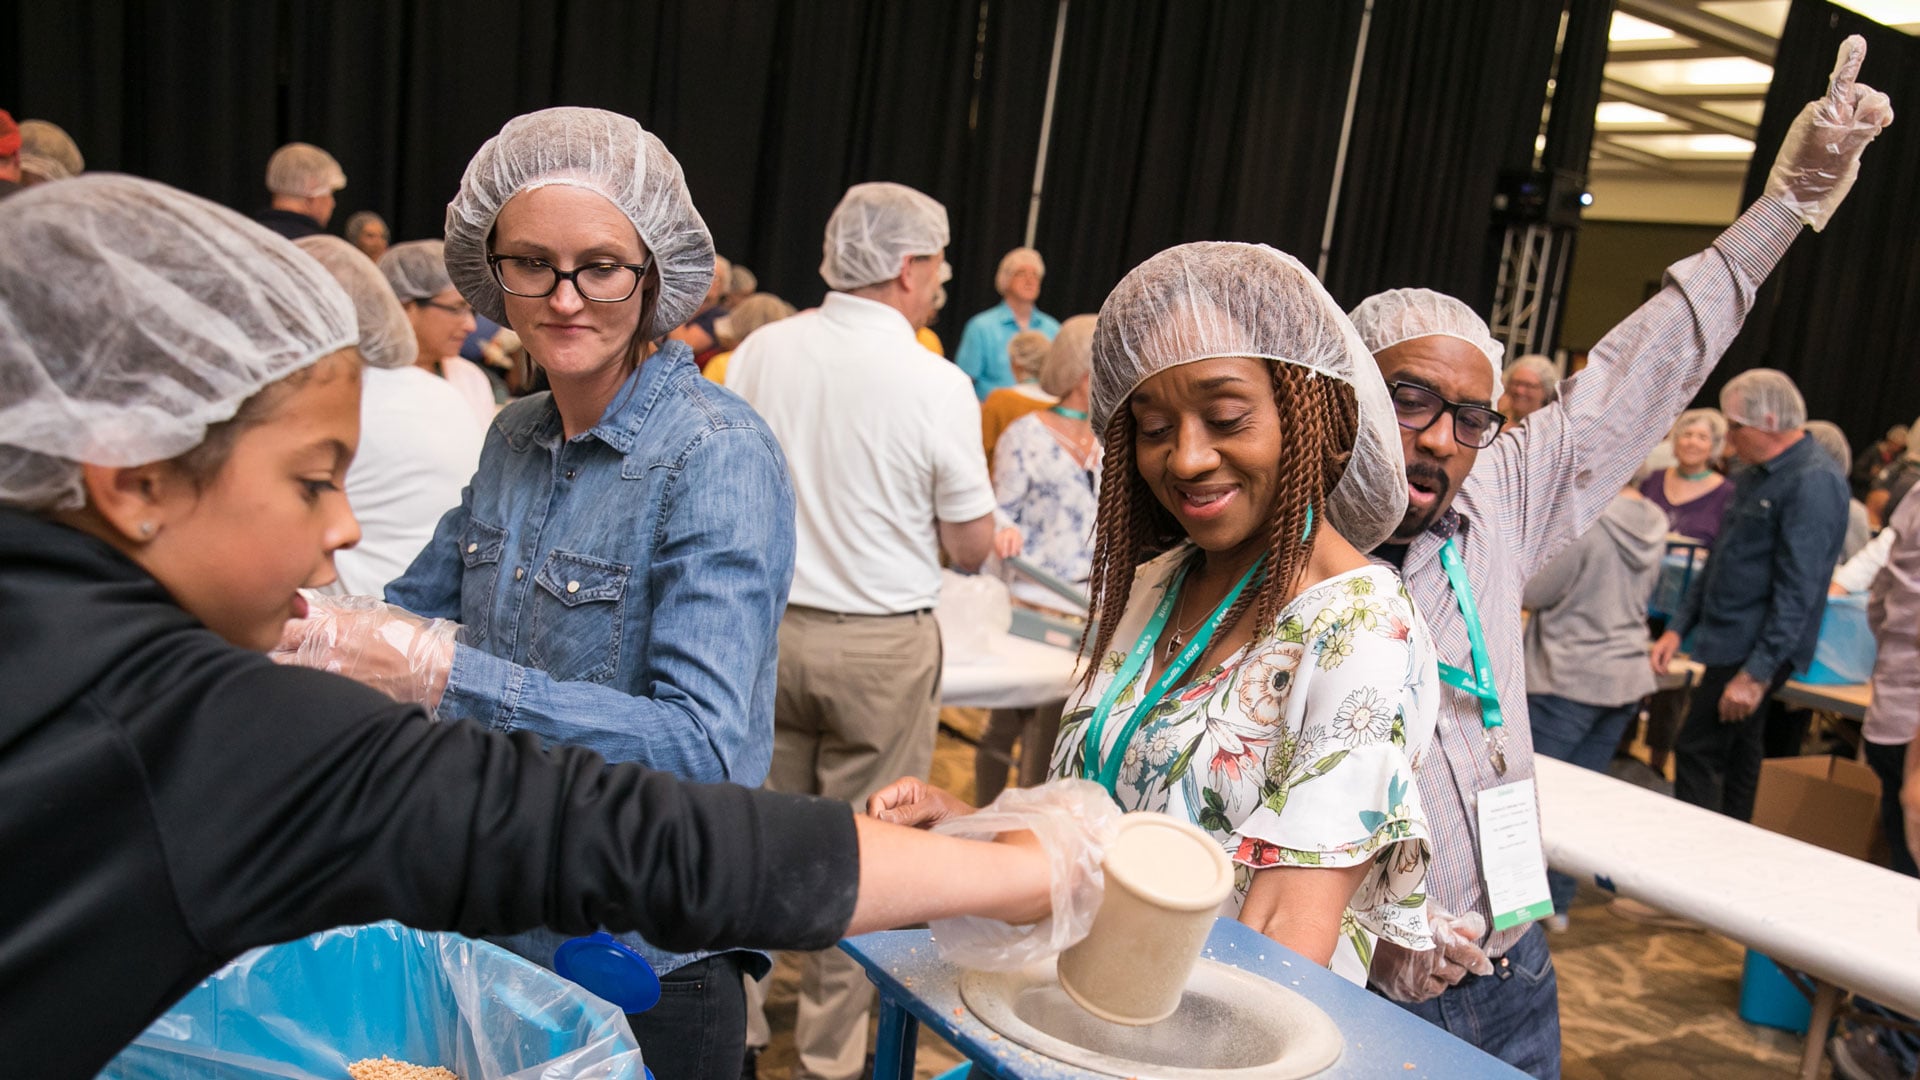 Foursquare Disaster Relief: Thanks for Packing Meals